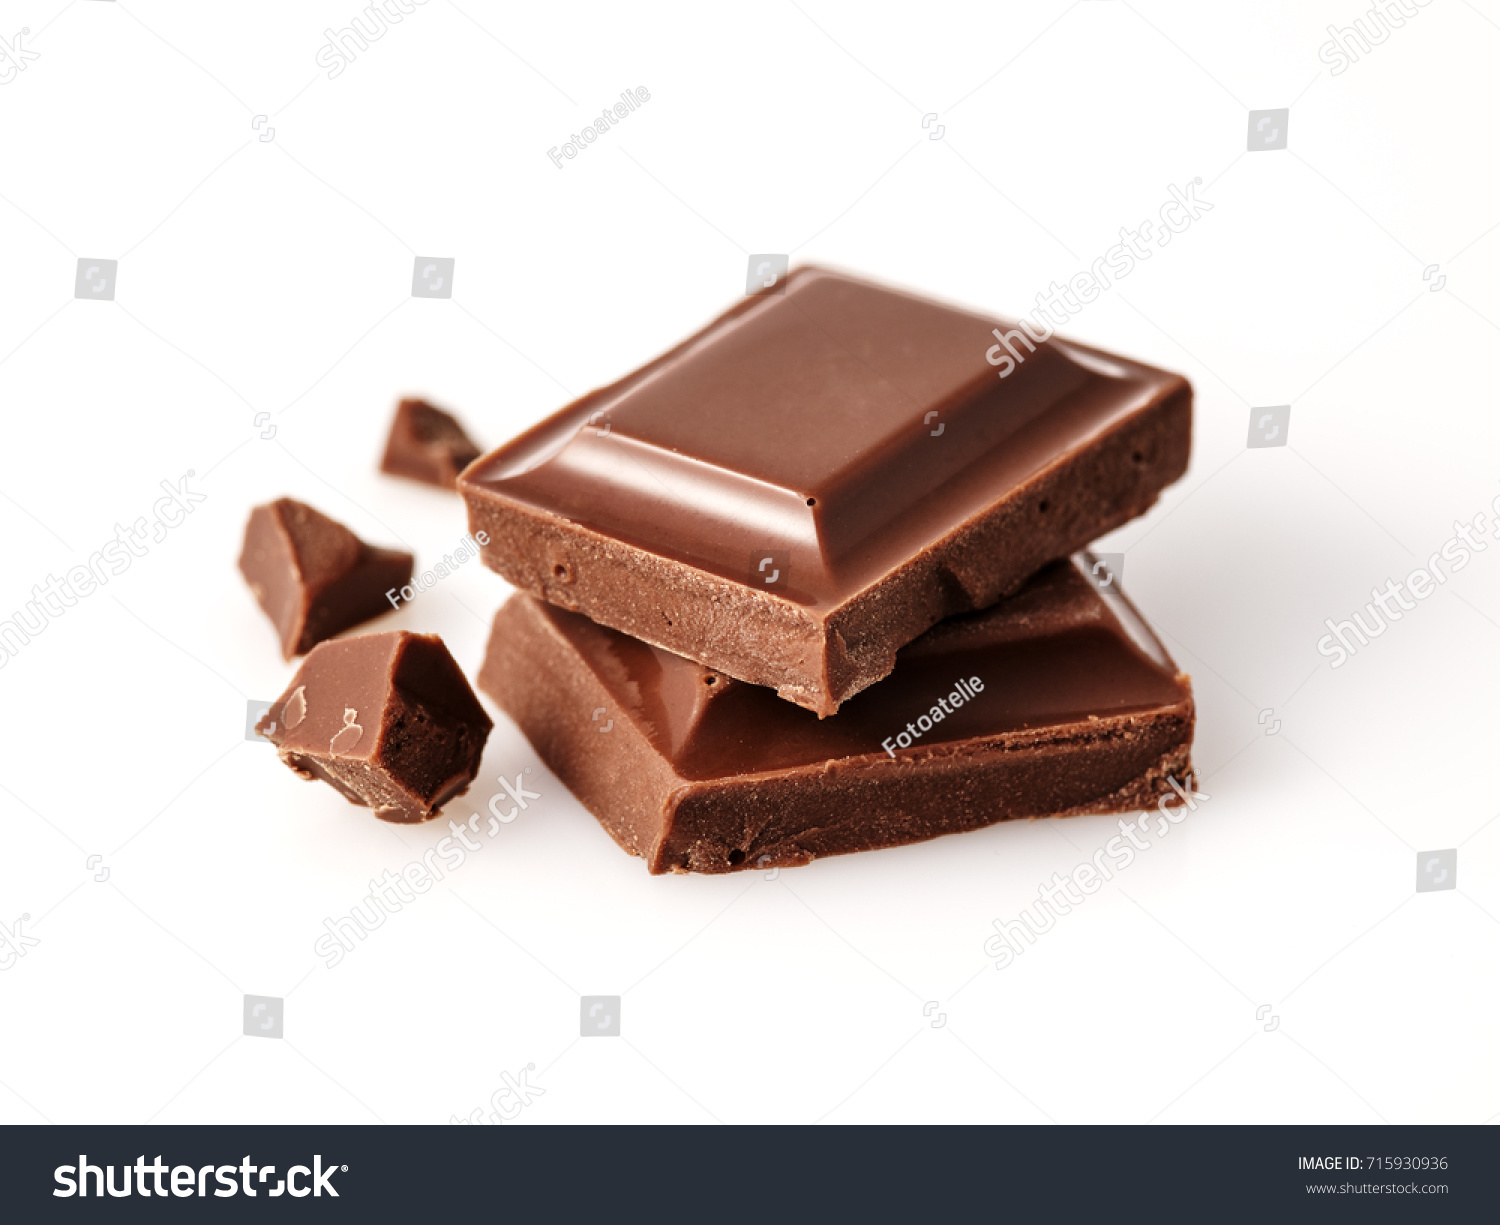 Macro photo  of Chocolate bar. Broken pieces over white background #715930936